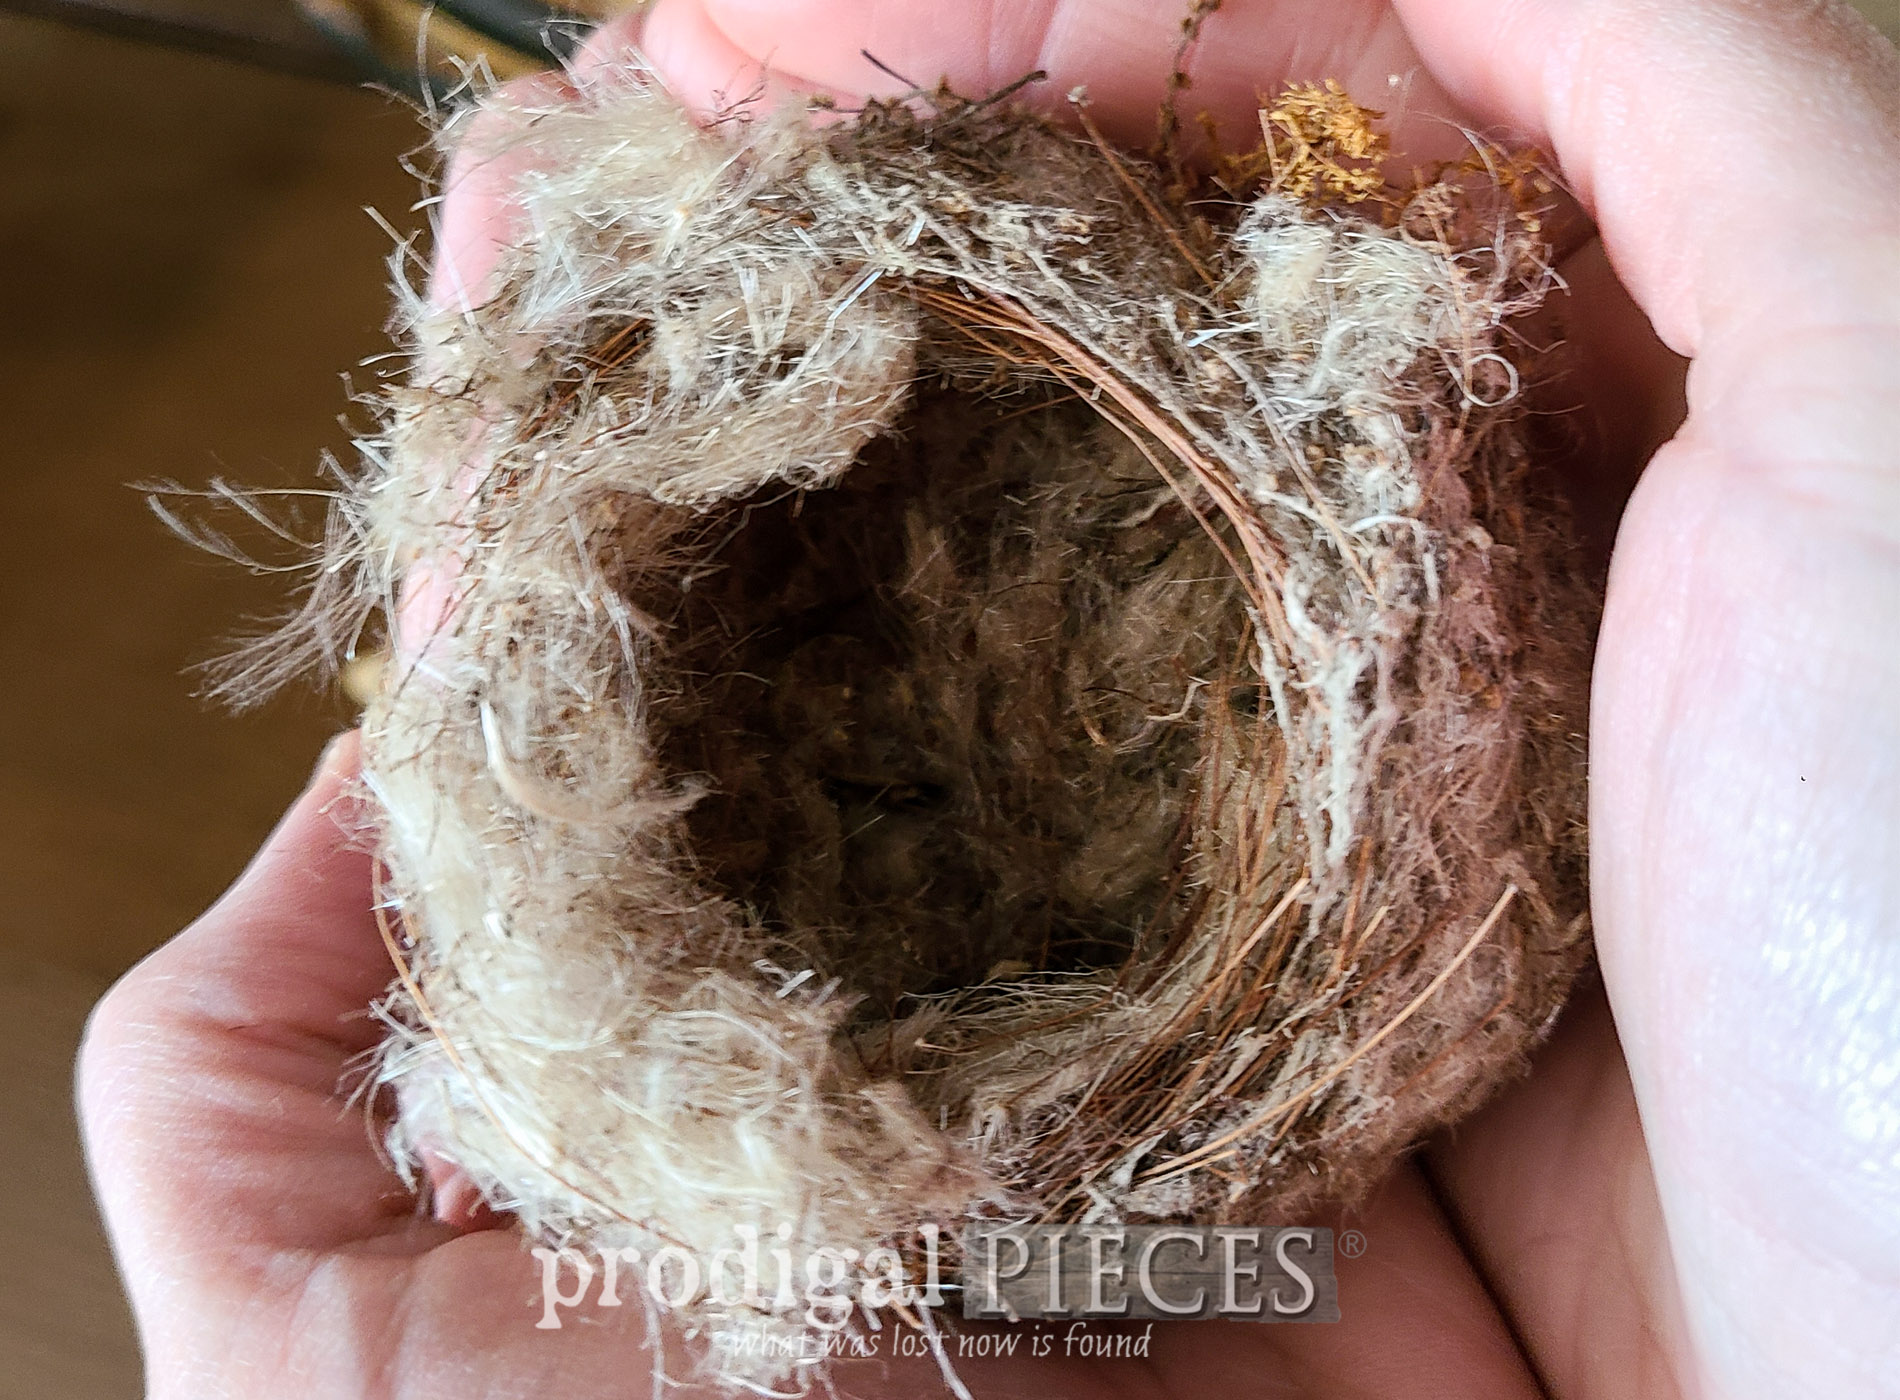 Featured Preparing for an Empty Nest | Parenting Advice Shared at Prodigal Pieces | prodigalpieces.com #prodigalpieces #family #parenting #faith